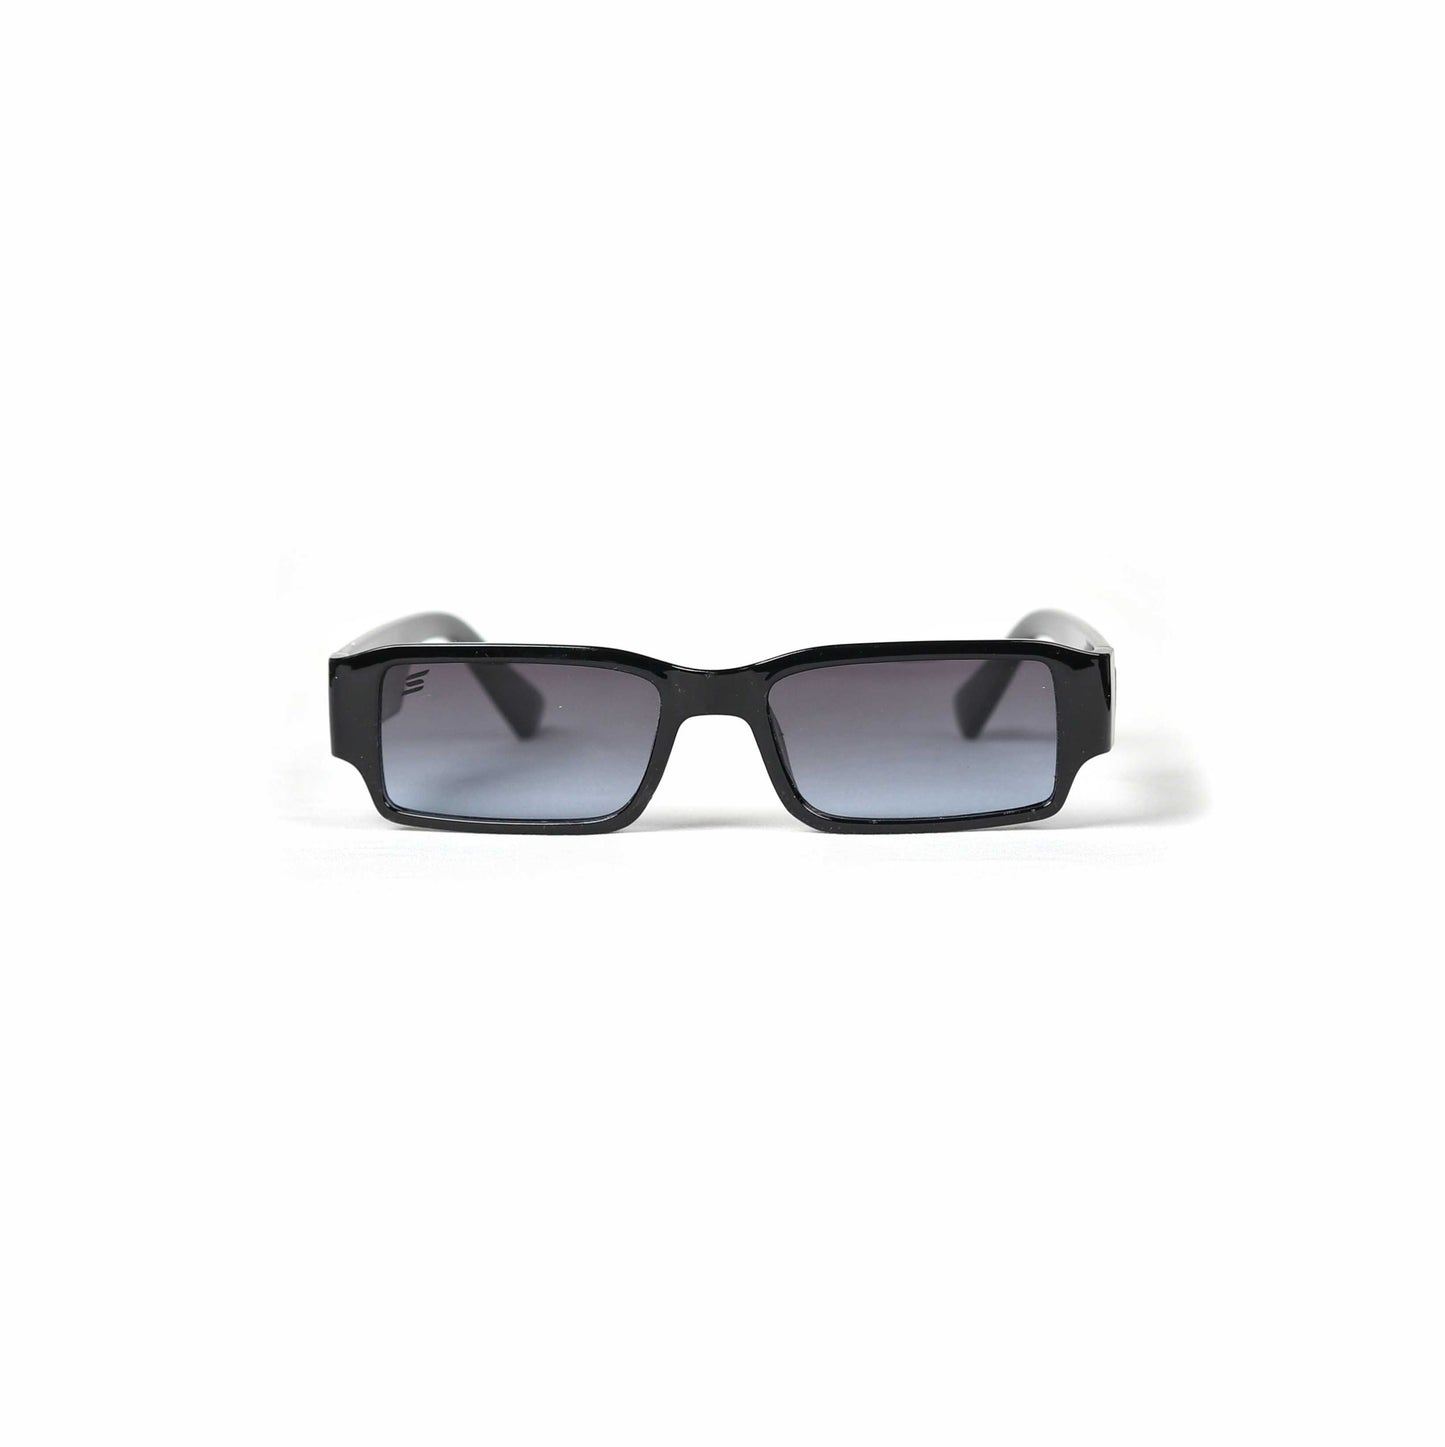 Espiars Rectangle PC shades (black/red)